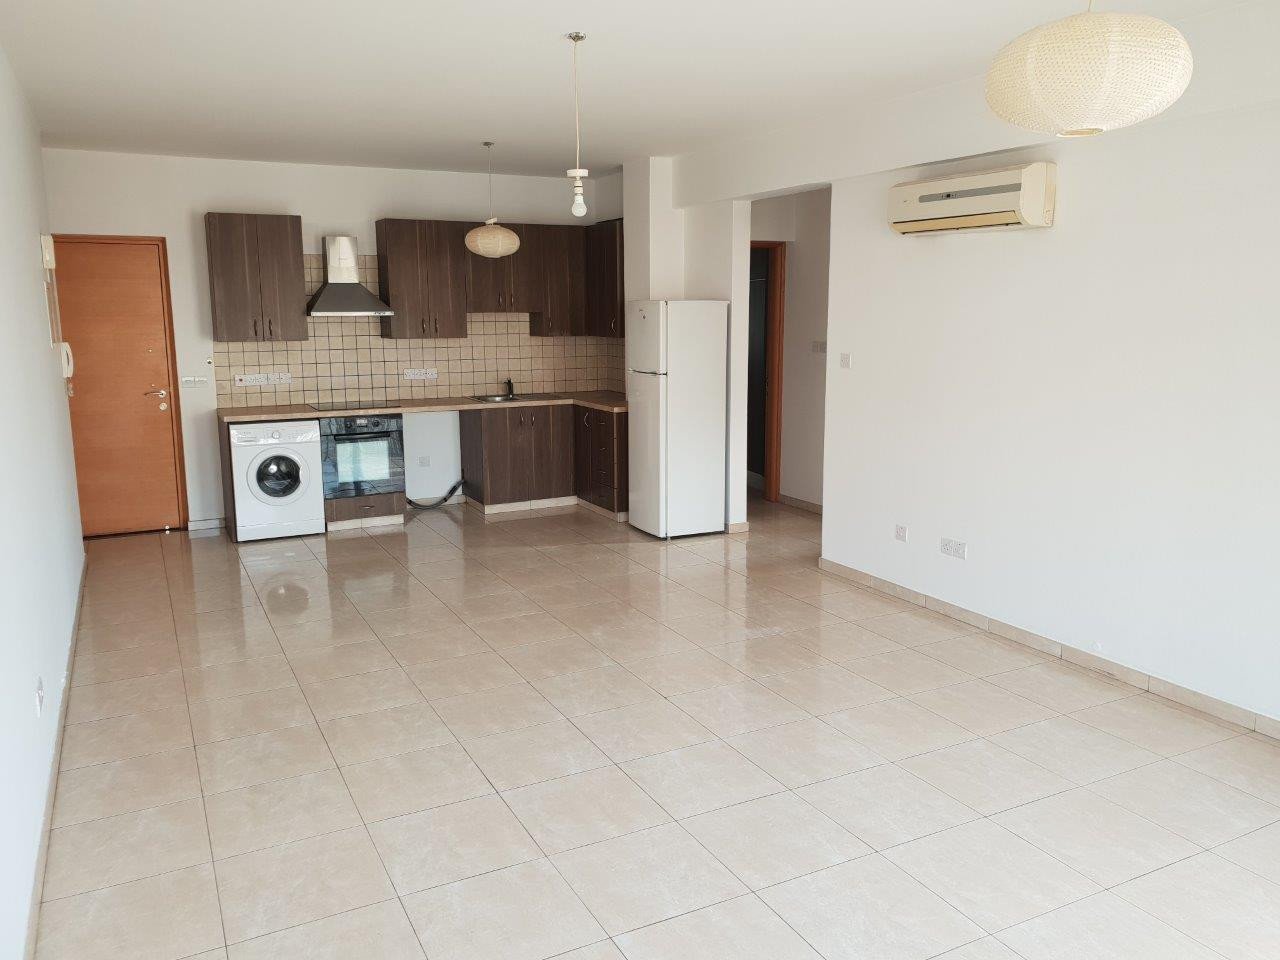 For Sale: Apartment (Flat) in Makedonitissa, Nicosia for Rent | Key Realtor Cyprus